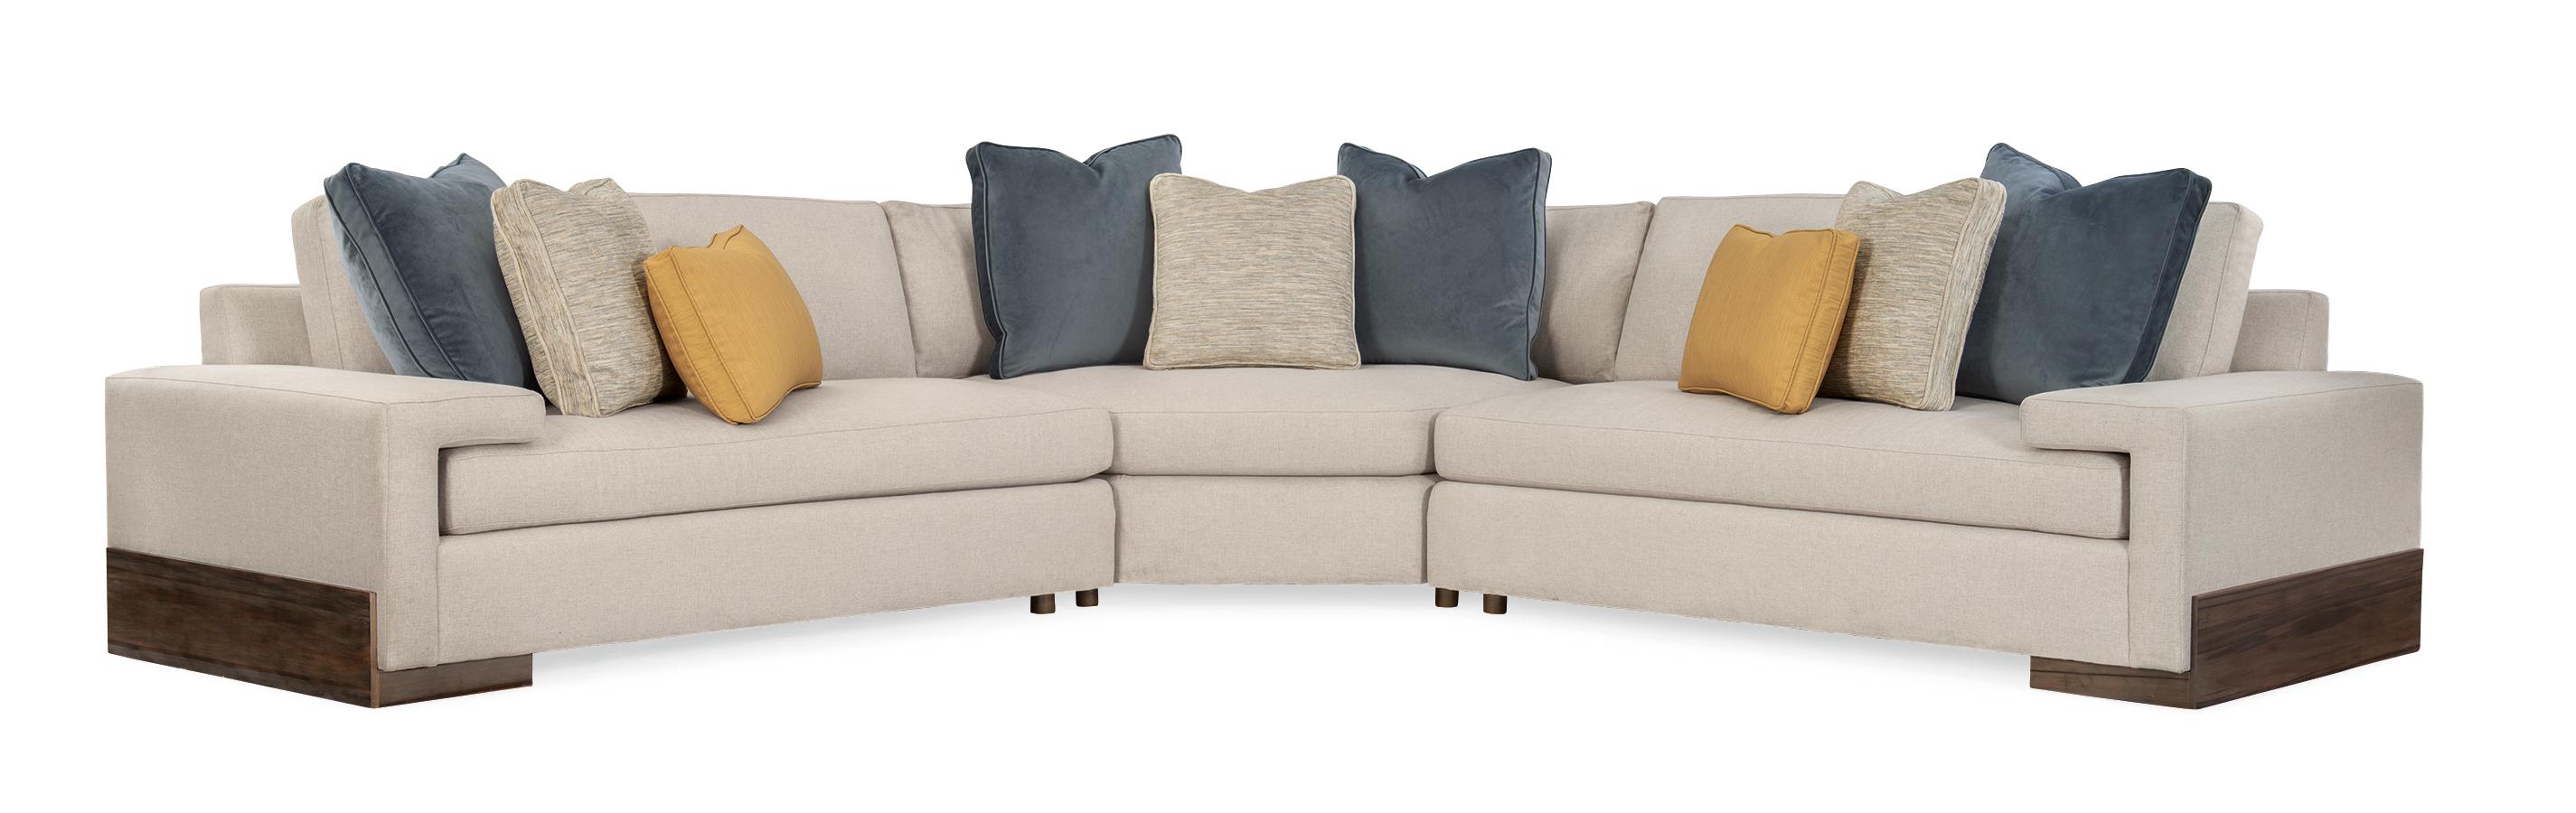 Contemporary Sectional Sofa I'M SHELF-ISH M090-018-SEC1-A in Sable Fabric